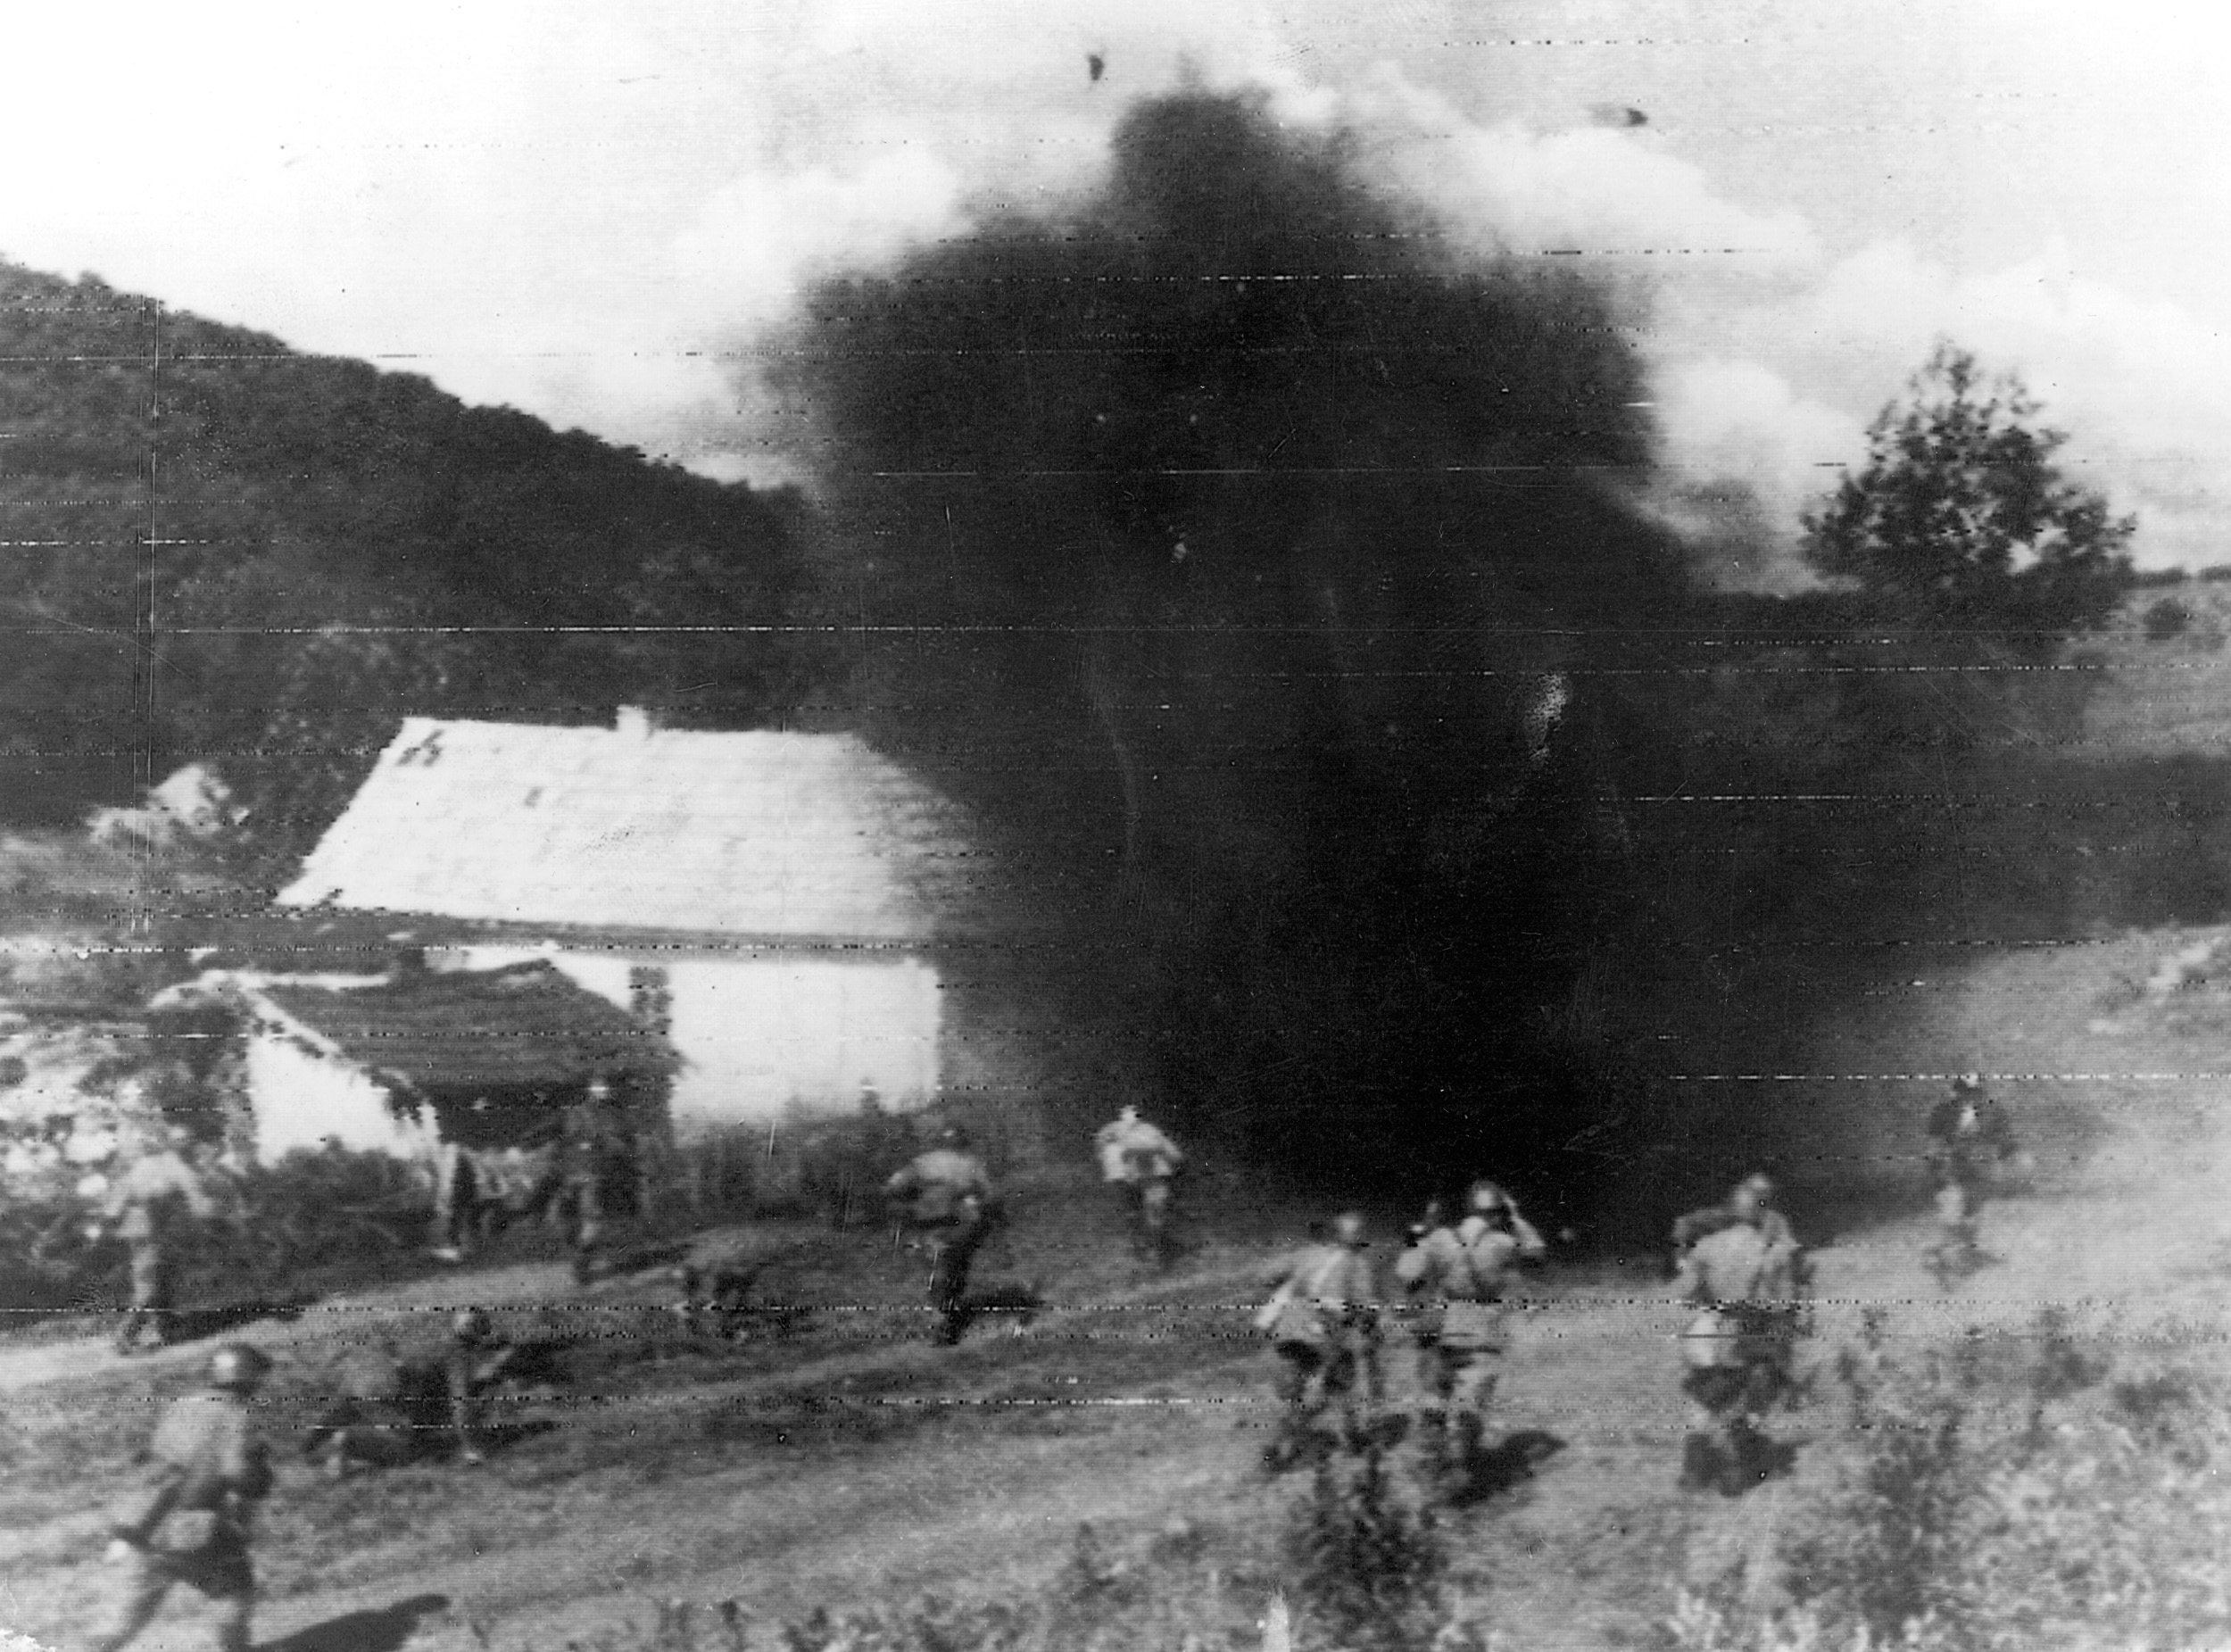 On July 24, 1944, a contingent of Red Army Soldiers moves past a damaged farm and toward German positions under constant bombardment from well-placed artillery. The German 88mm canon was a multipurpose weapon, effective against aircraft, armor, and enemy troops.